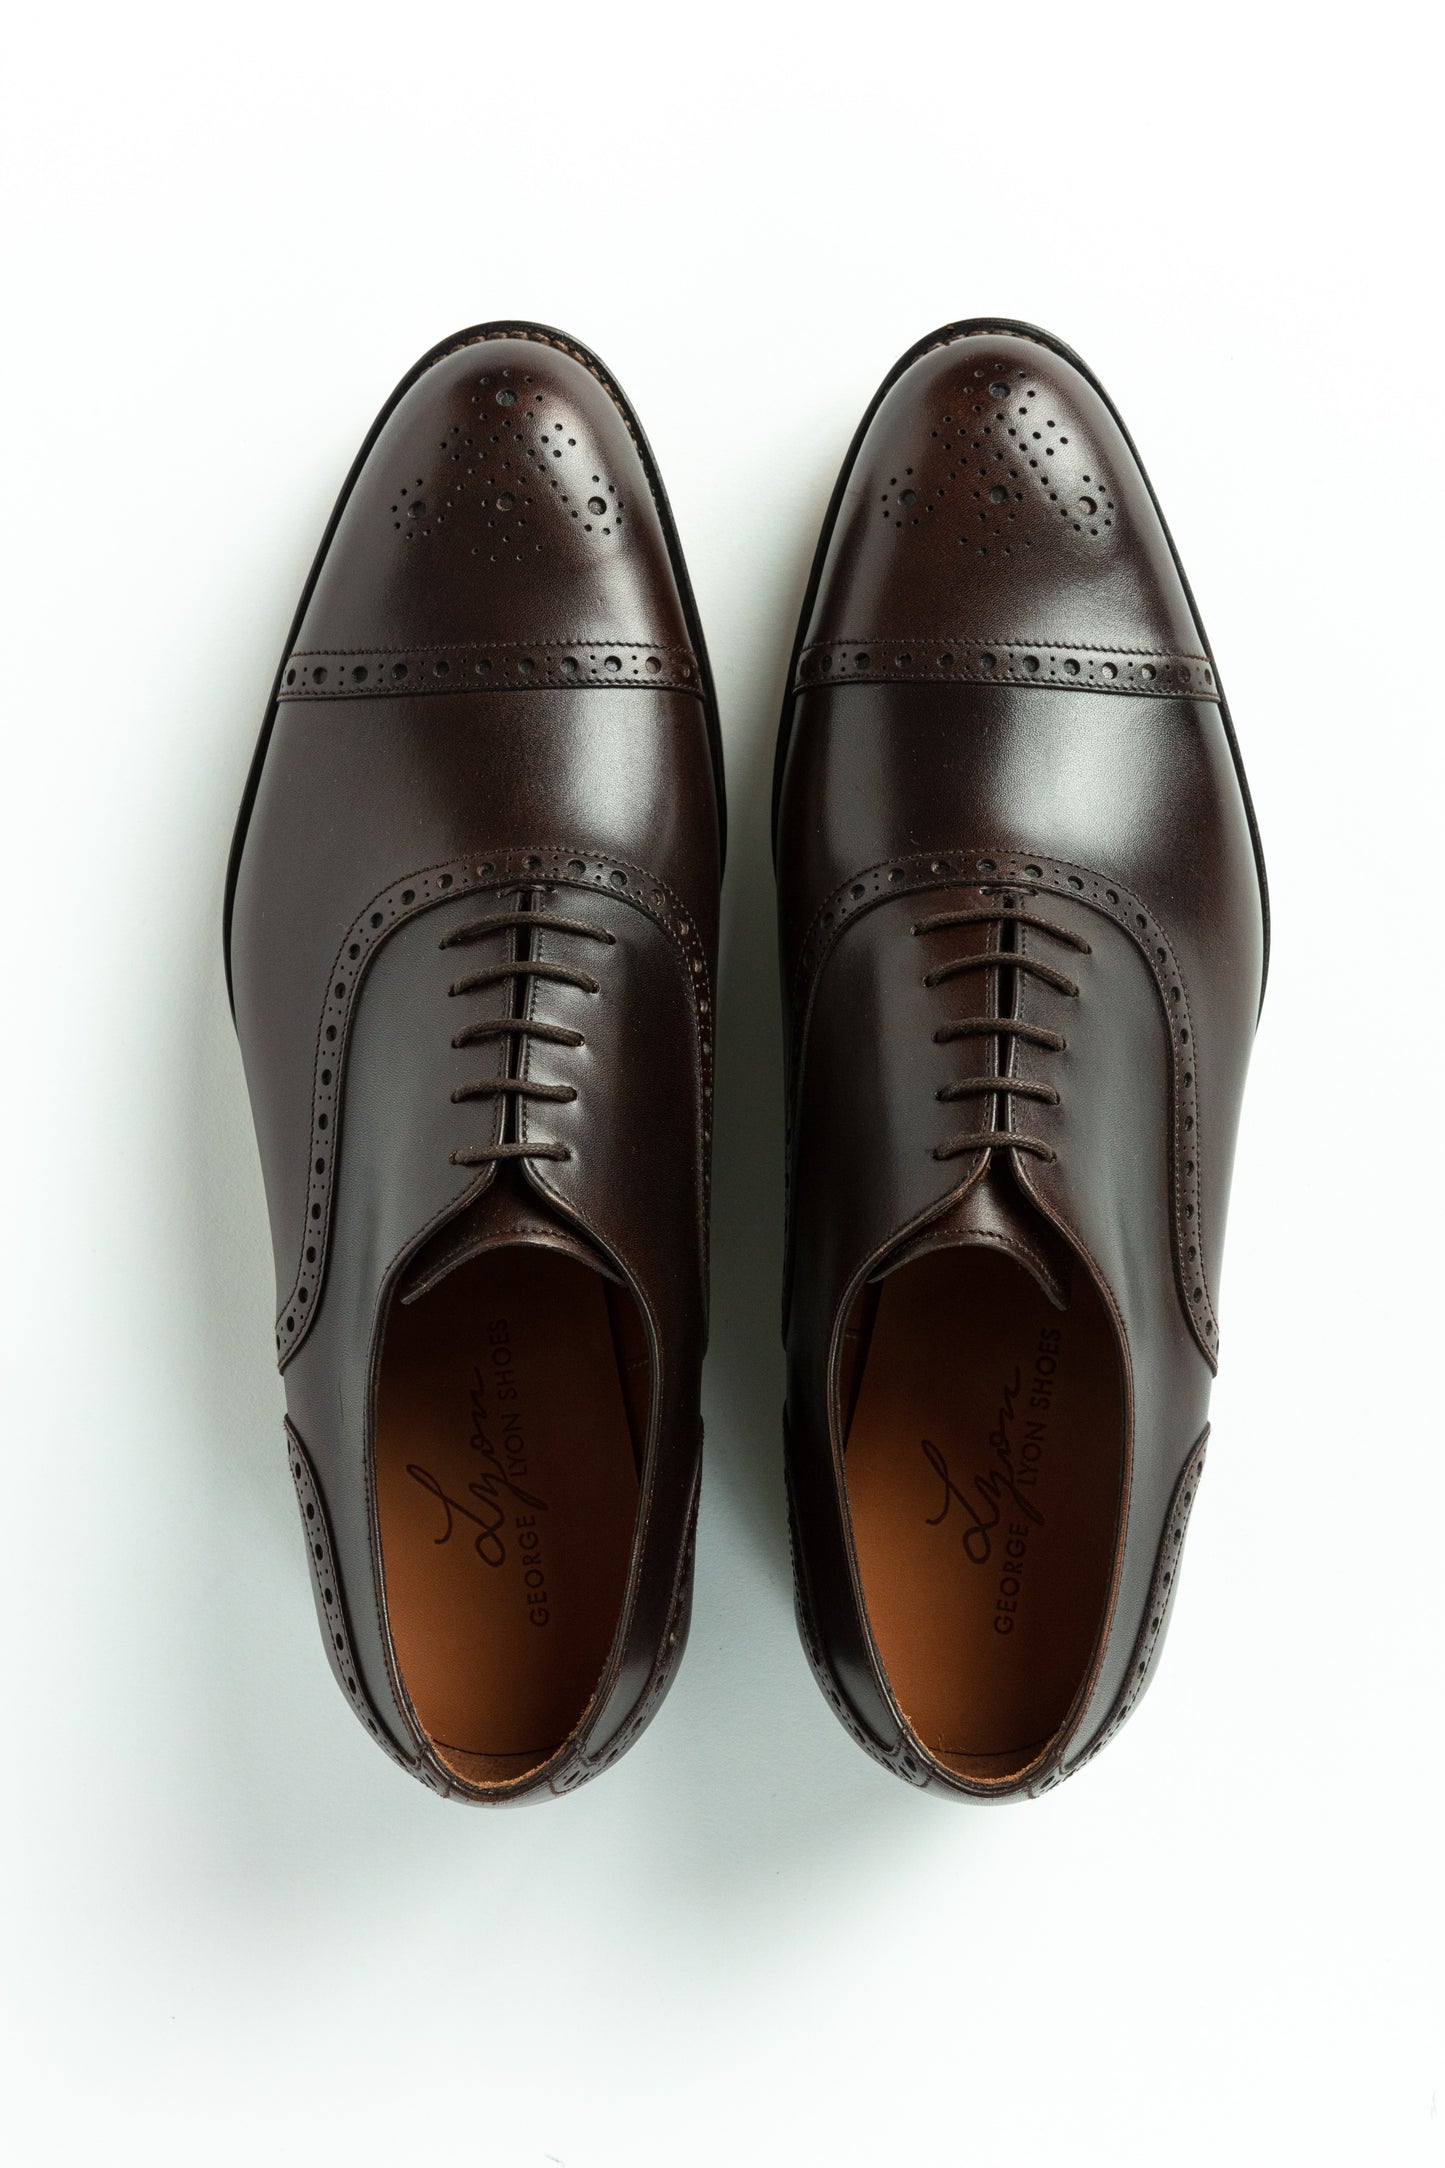 The Spencer in Mahogany with Matching Belt